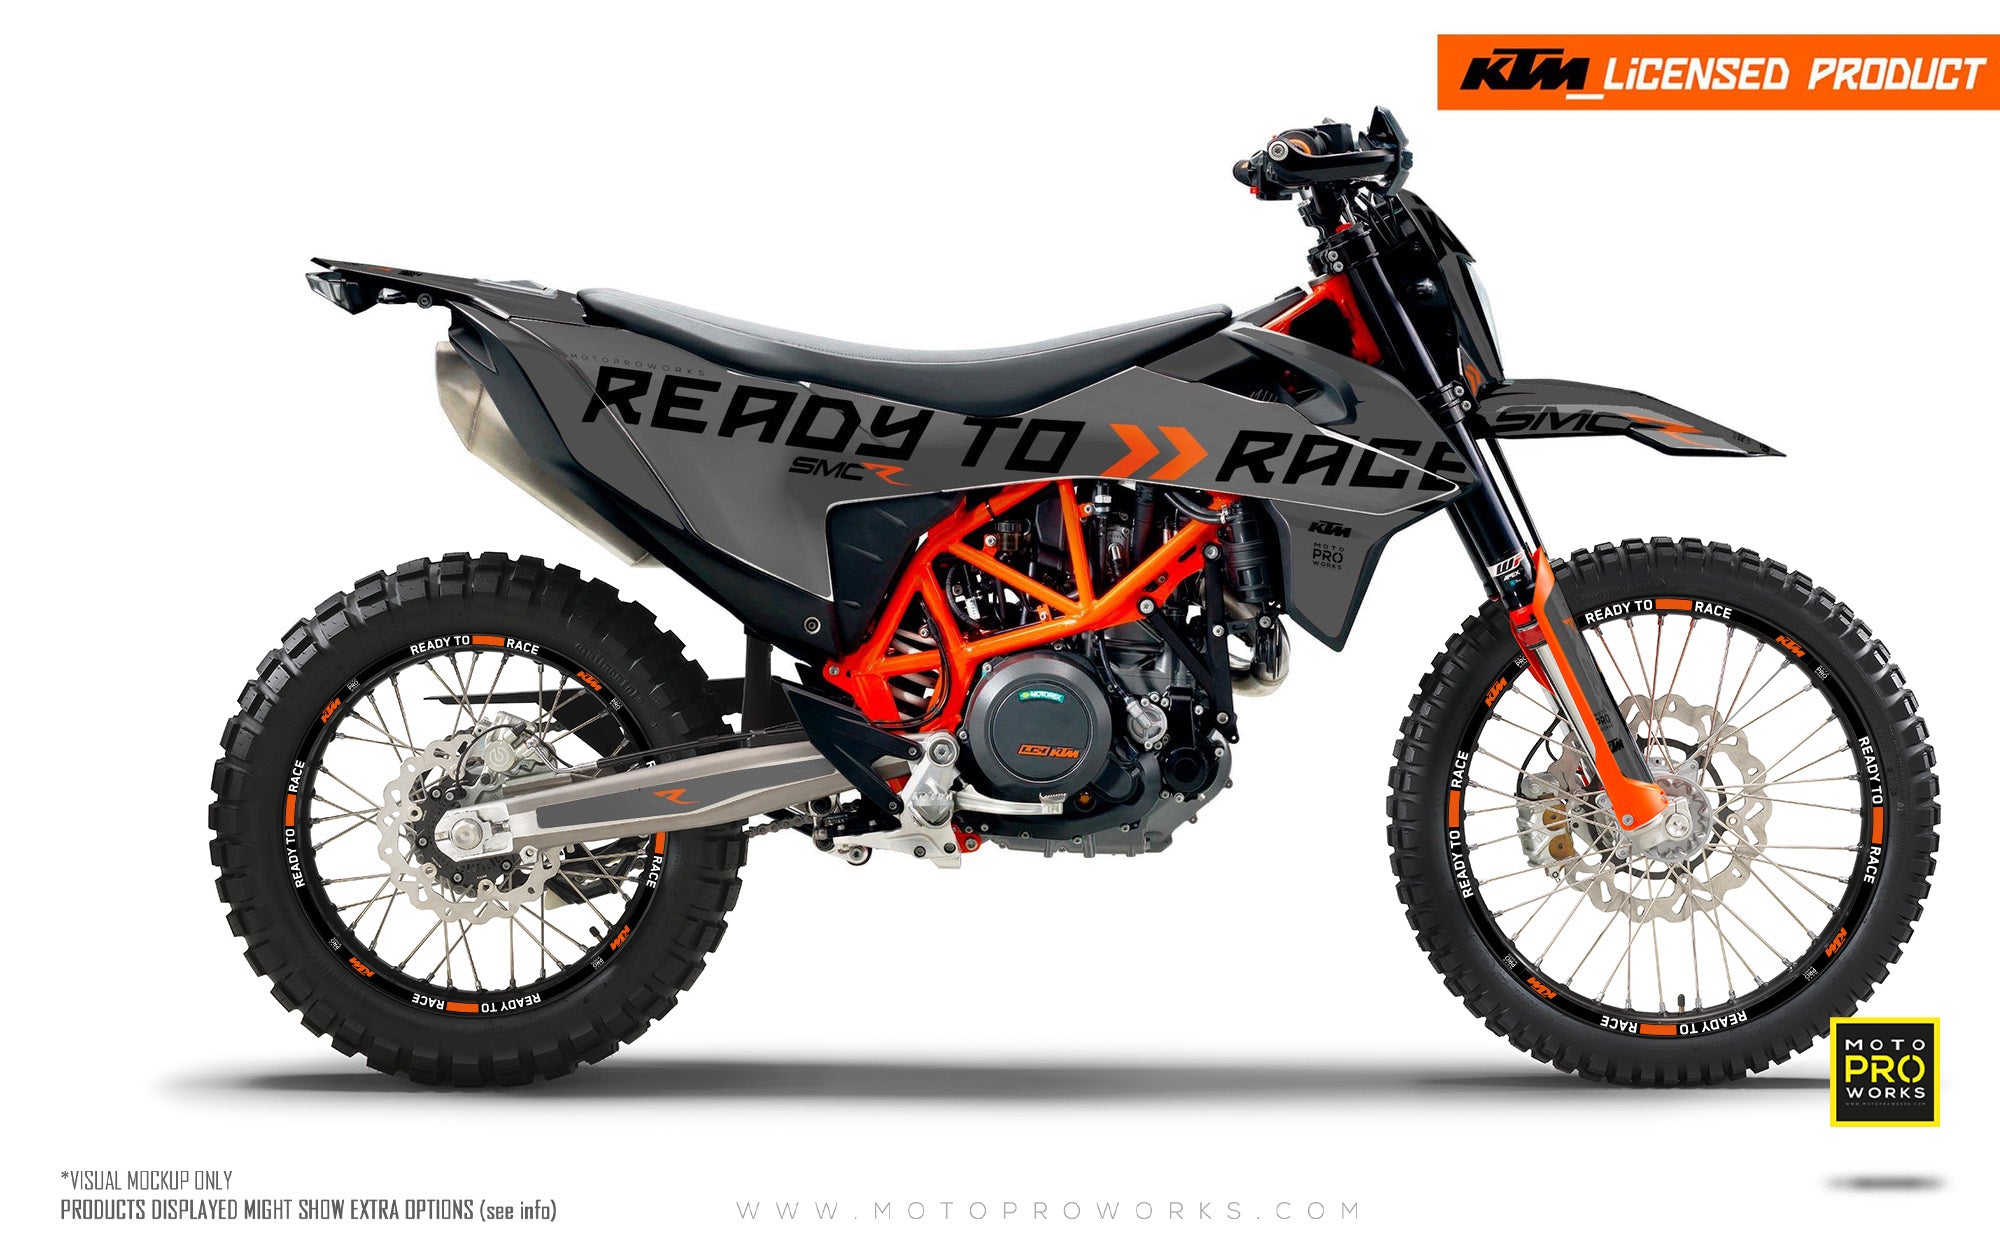 KTM GRAPHIC KIT - 690 SMC-R "Ready2Race" (Grey) - MotoProWorks | Decals and Bike Graphic kit